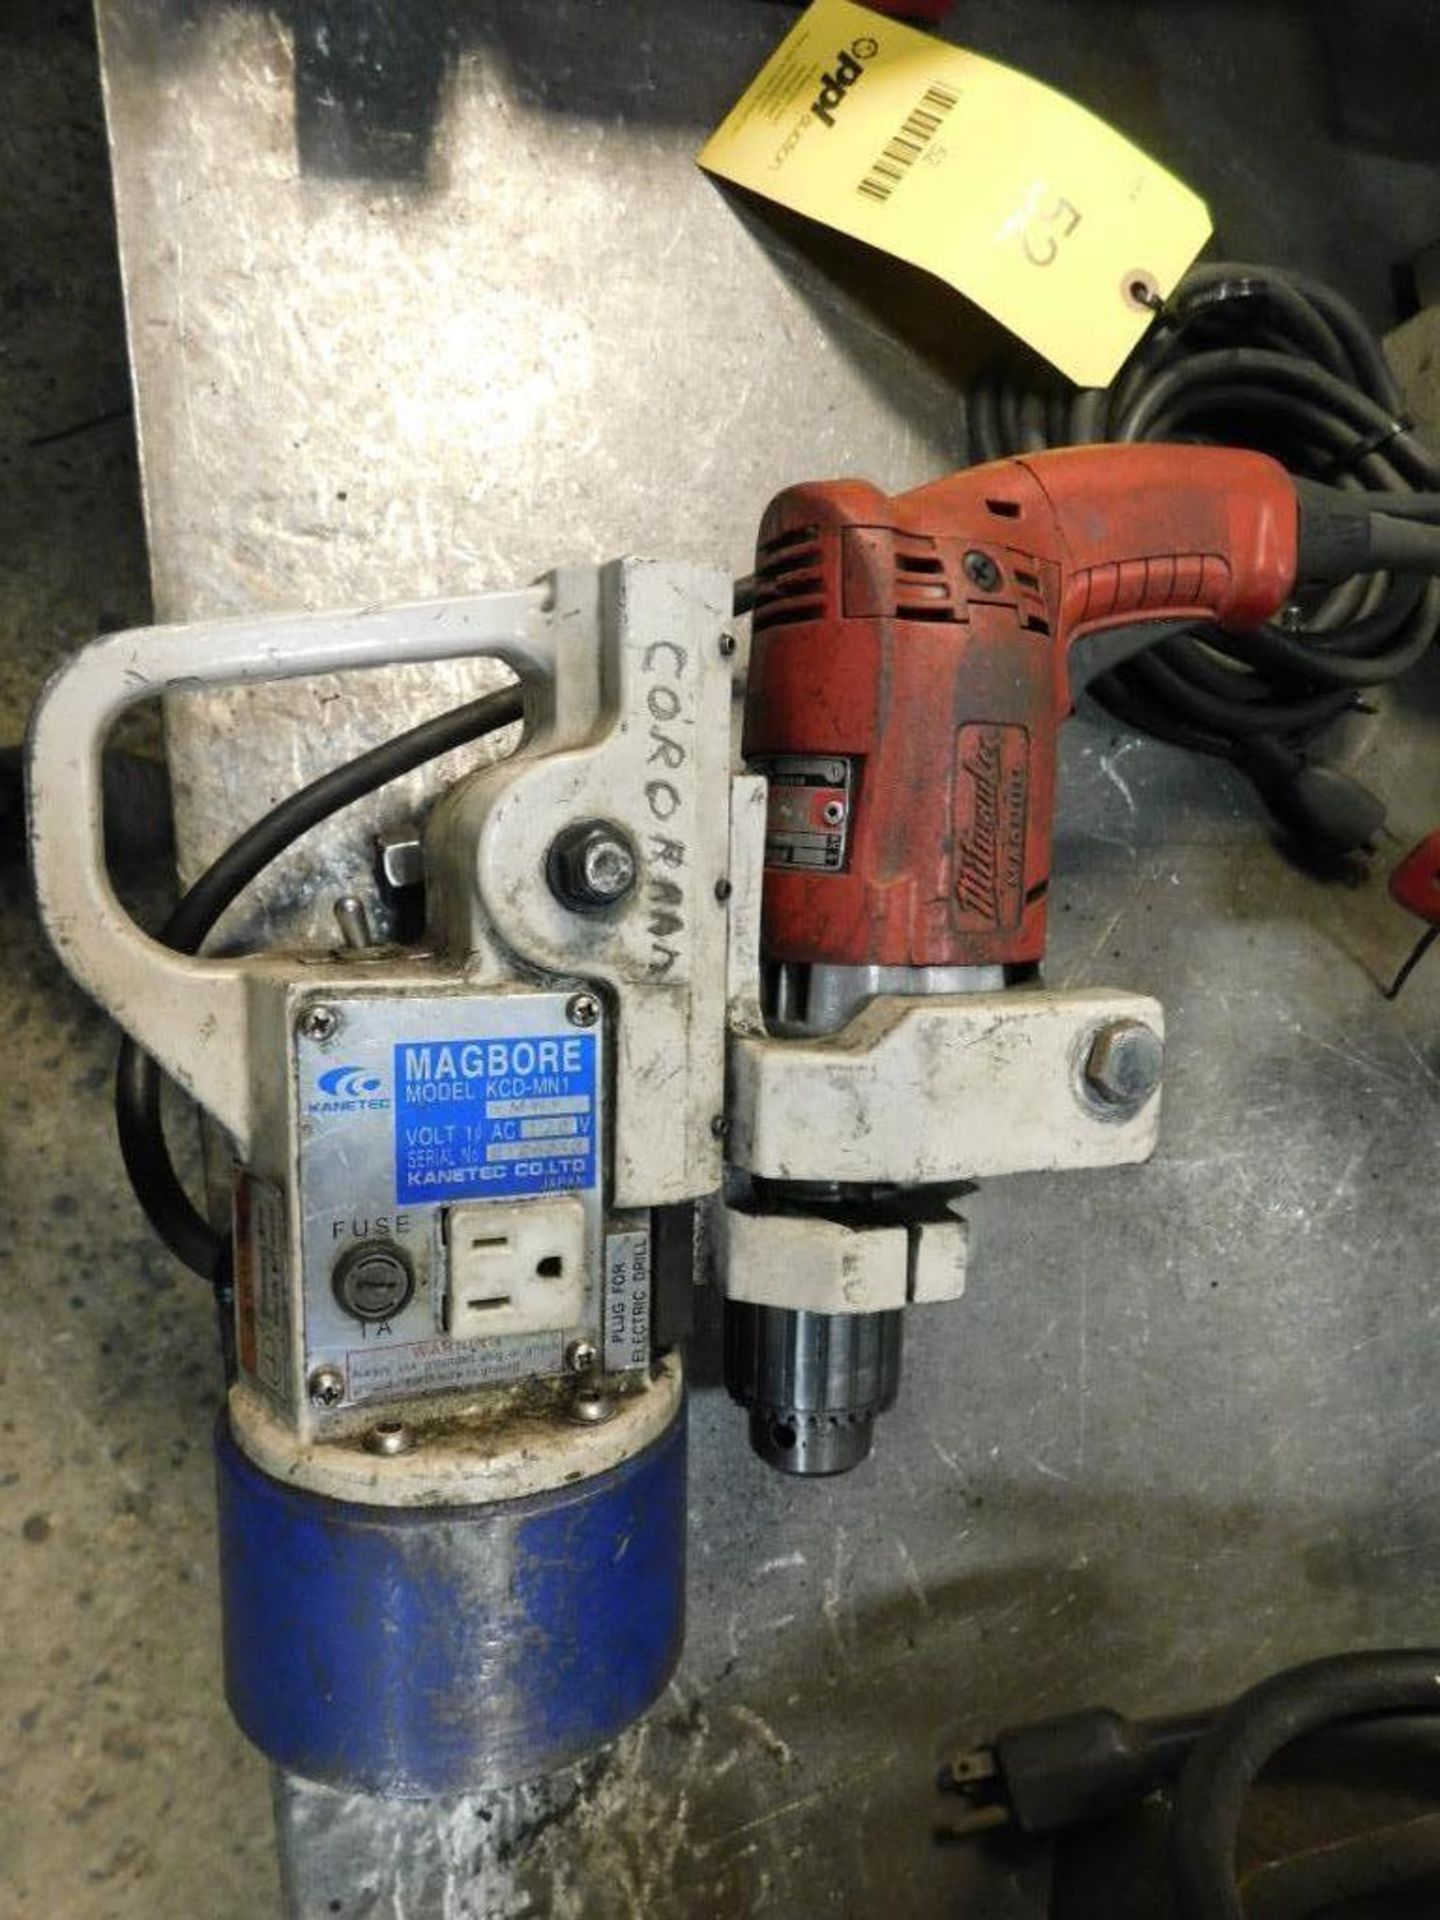 LOT: Milwaukee Magnum Hole Shooter Drill Driver, with Kanetec Magbore Model KCD-MN1 Magnetic Drill